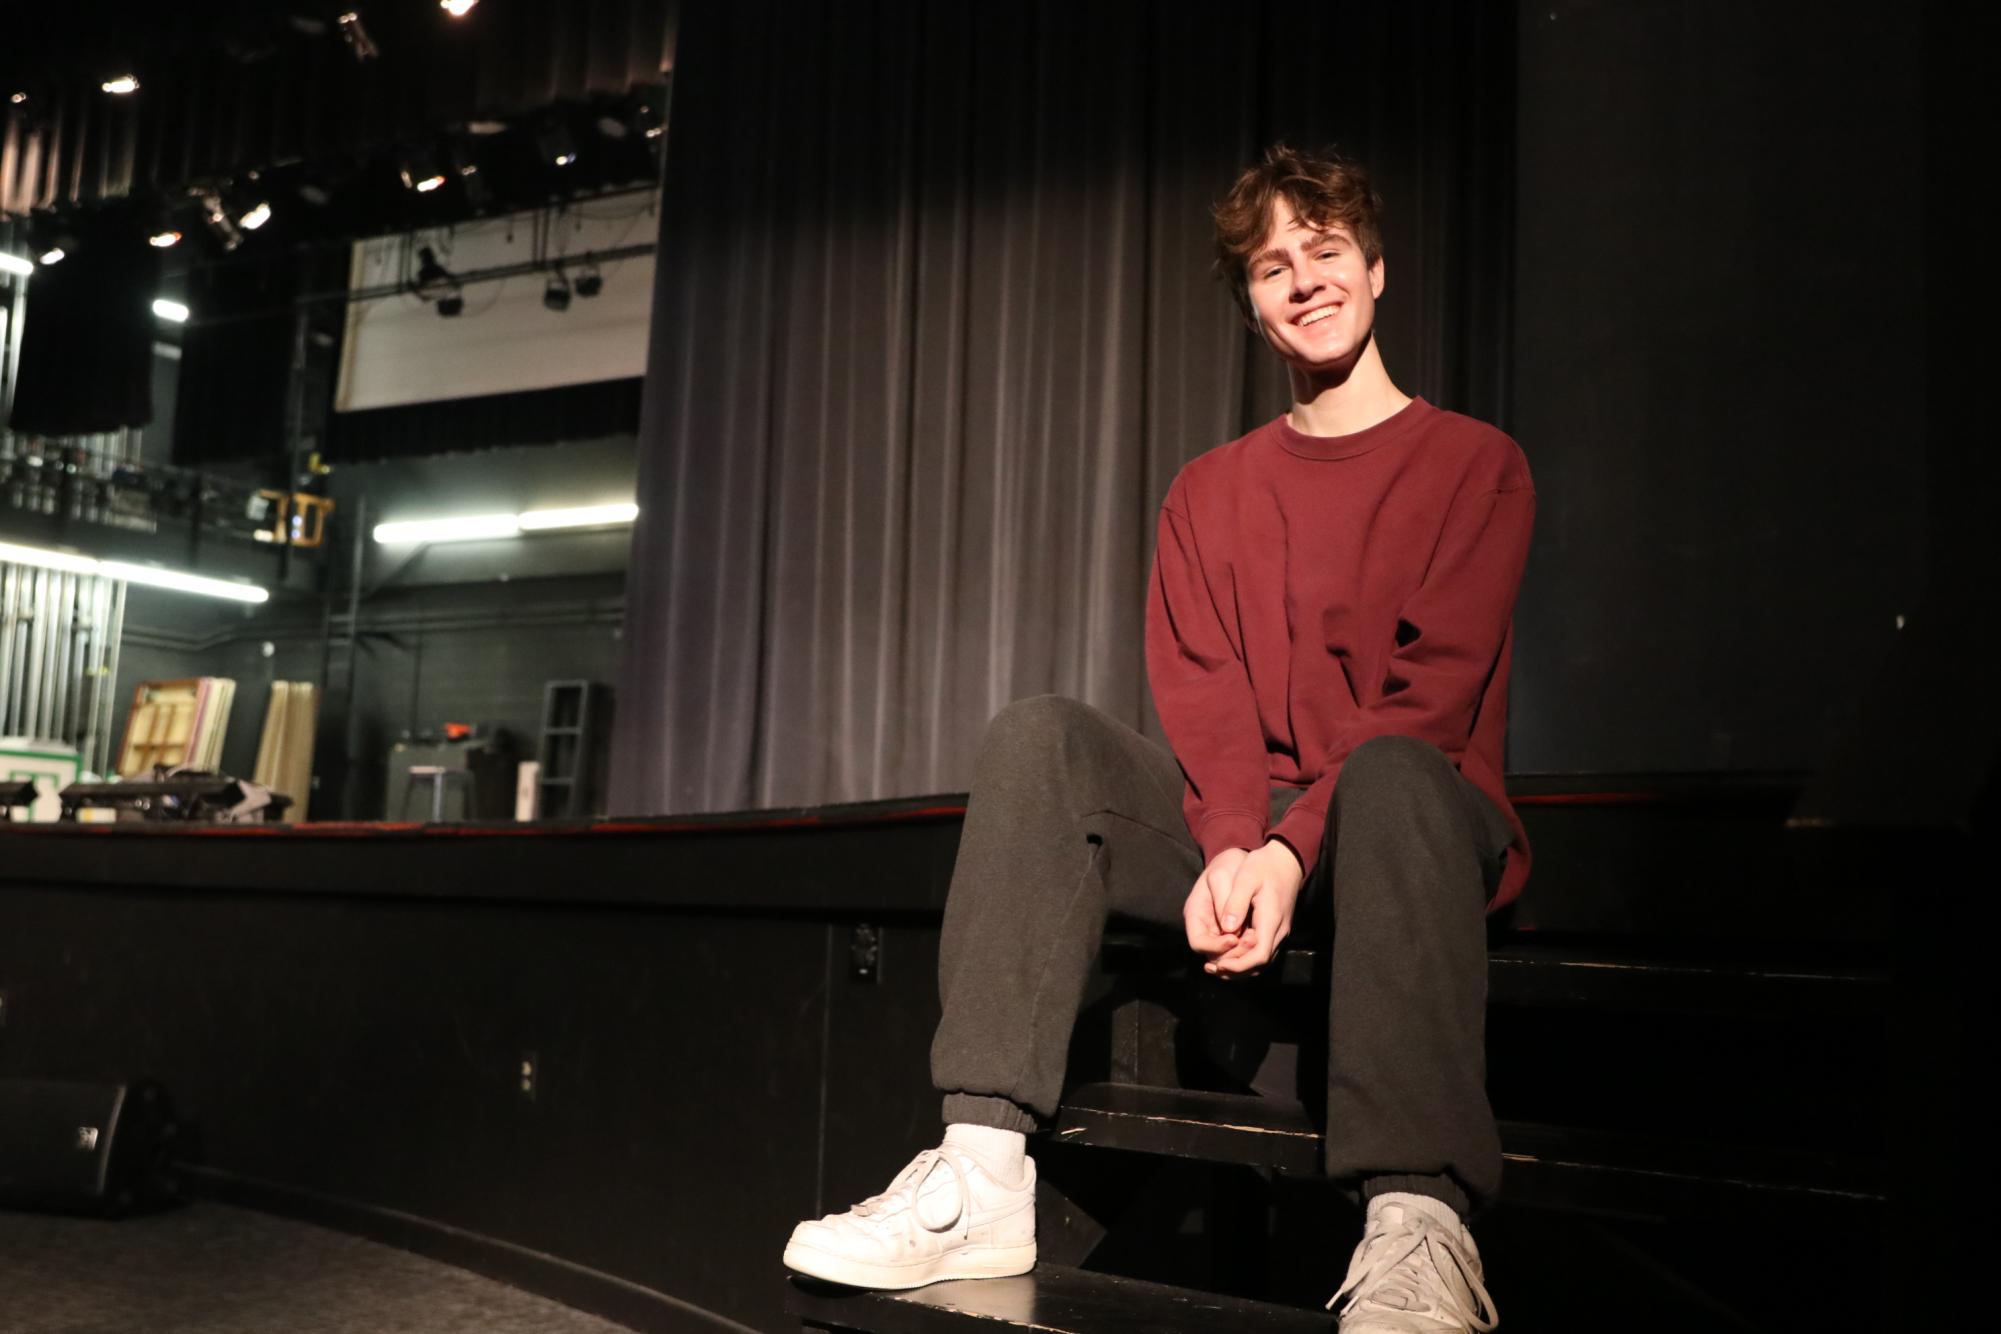 Senior Max Turman poses on the proscenium stage in the auditorium. The fine arts department recently performed “Matilda” on this stage, in which Turman played the role of Mr. Wormwood.